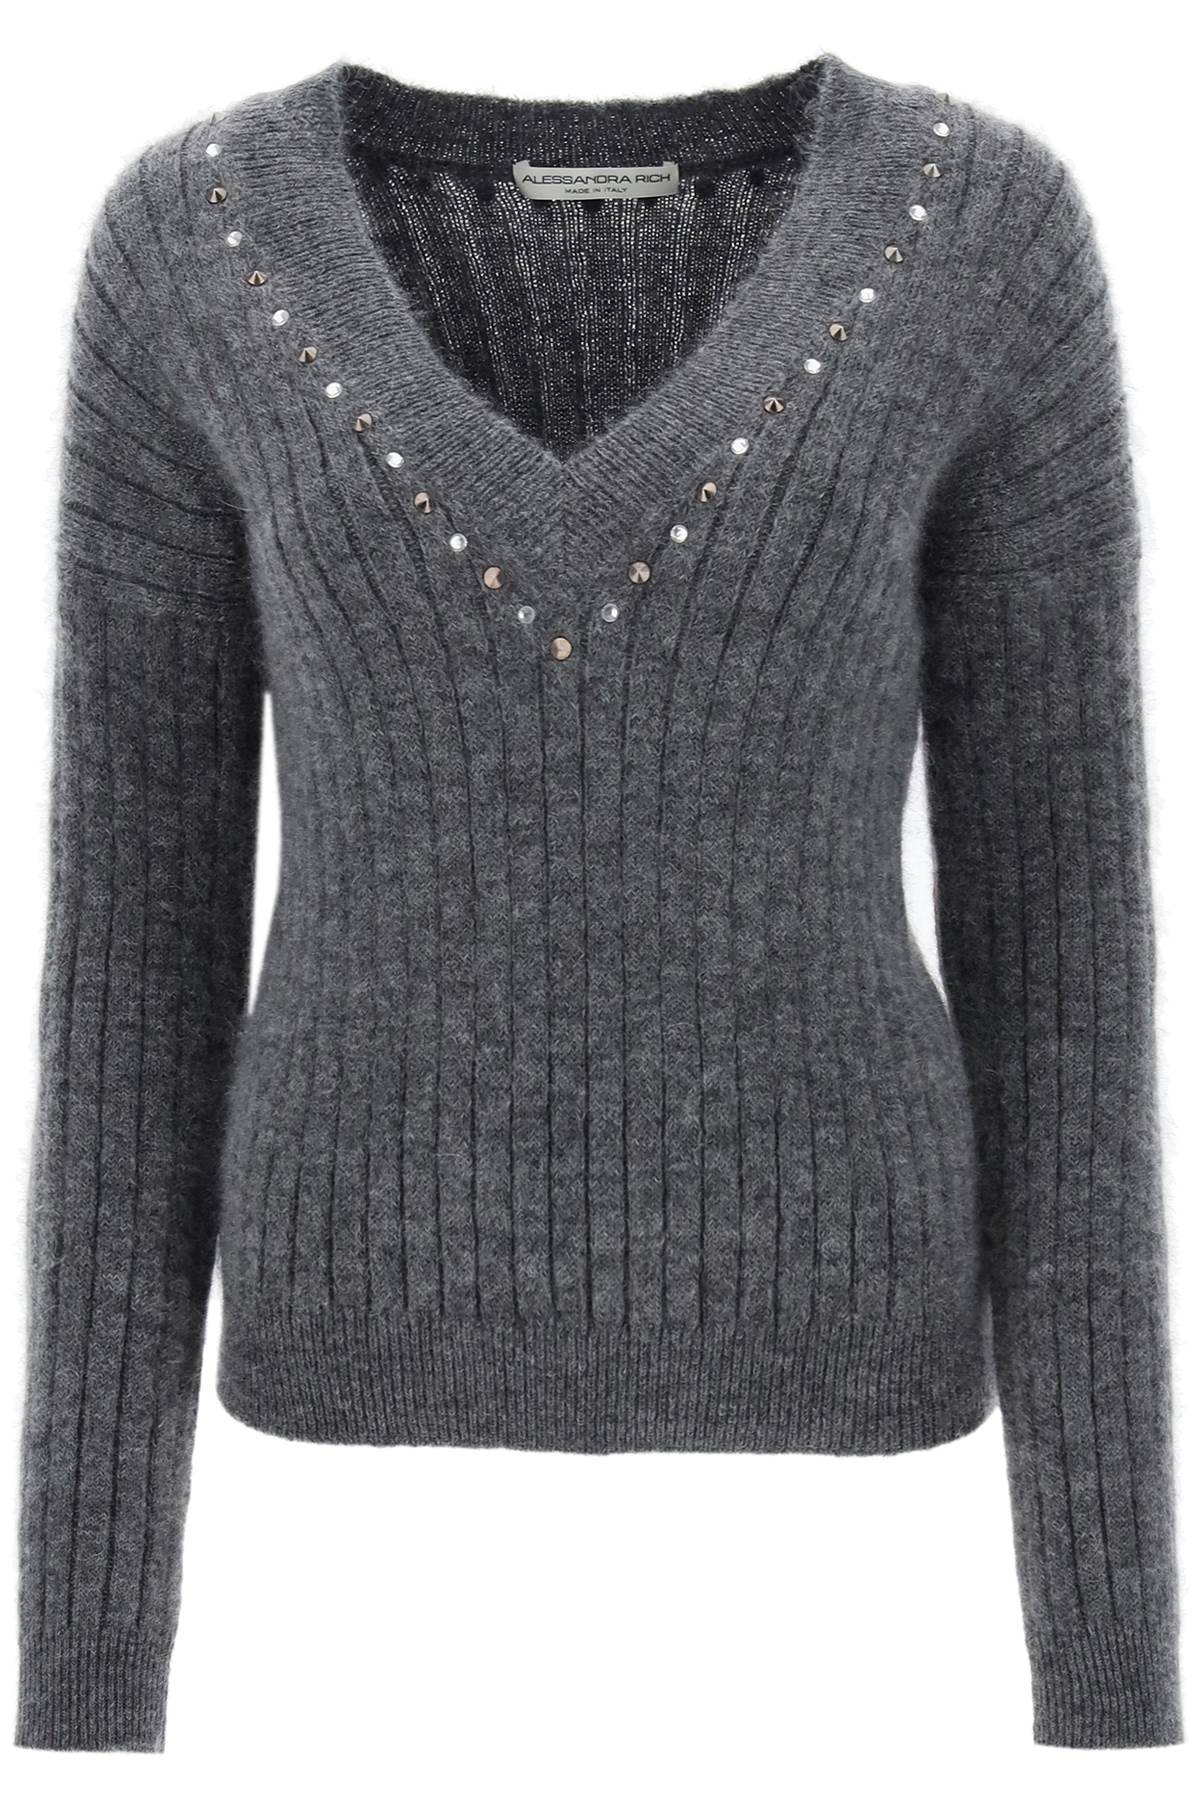 Wool Knit Sweater With Studs And Crystals